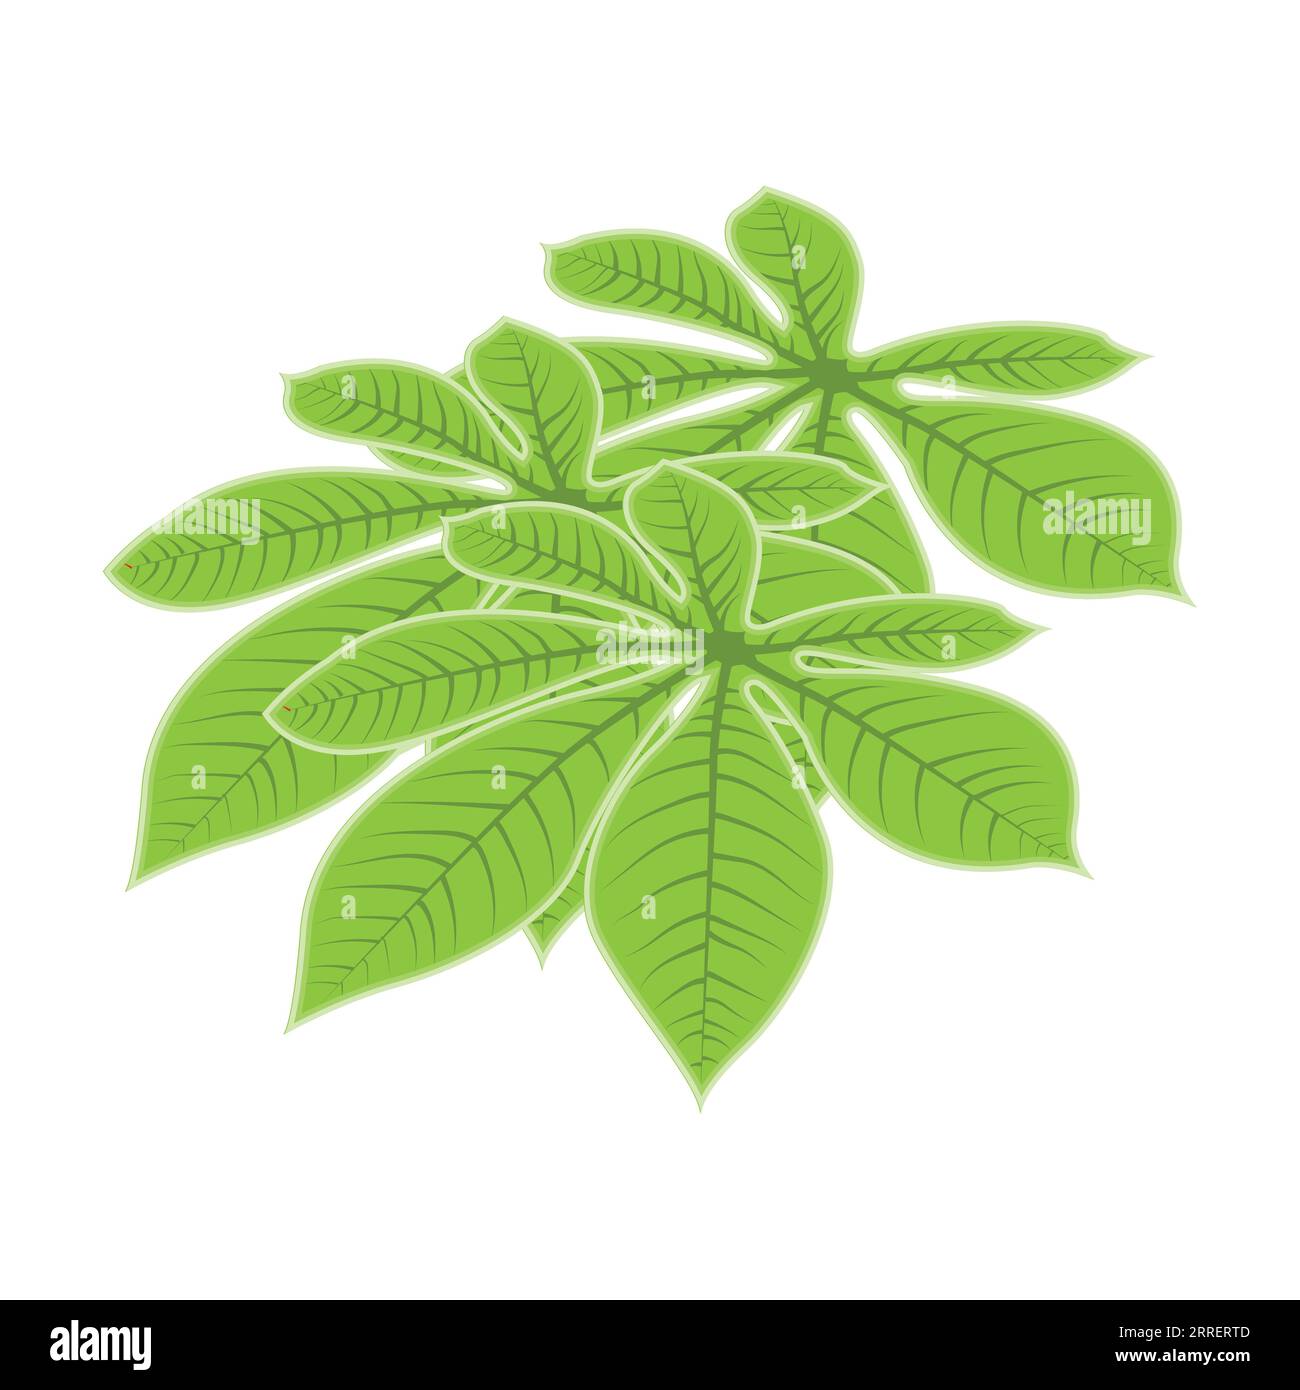 Leaf Logo Green Plant Design Leaves Of Trees Product Brand Template Illustration Stock Vector